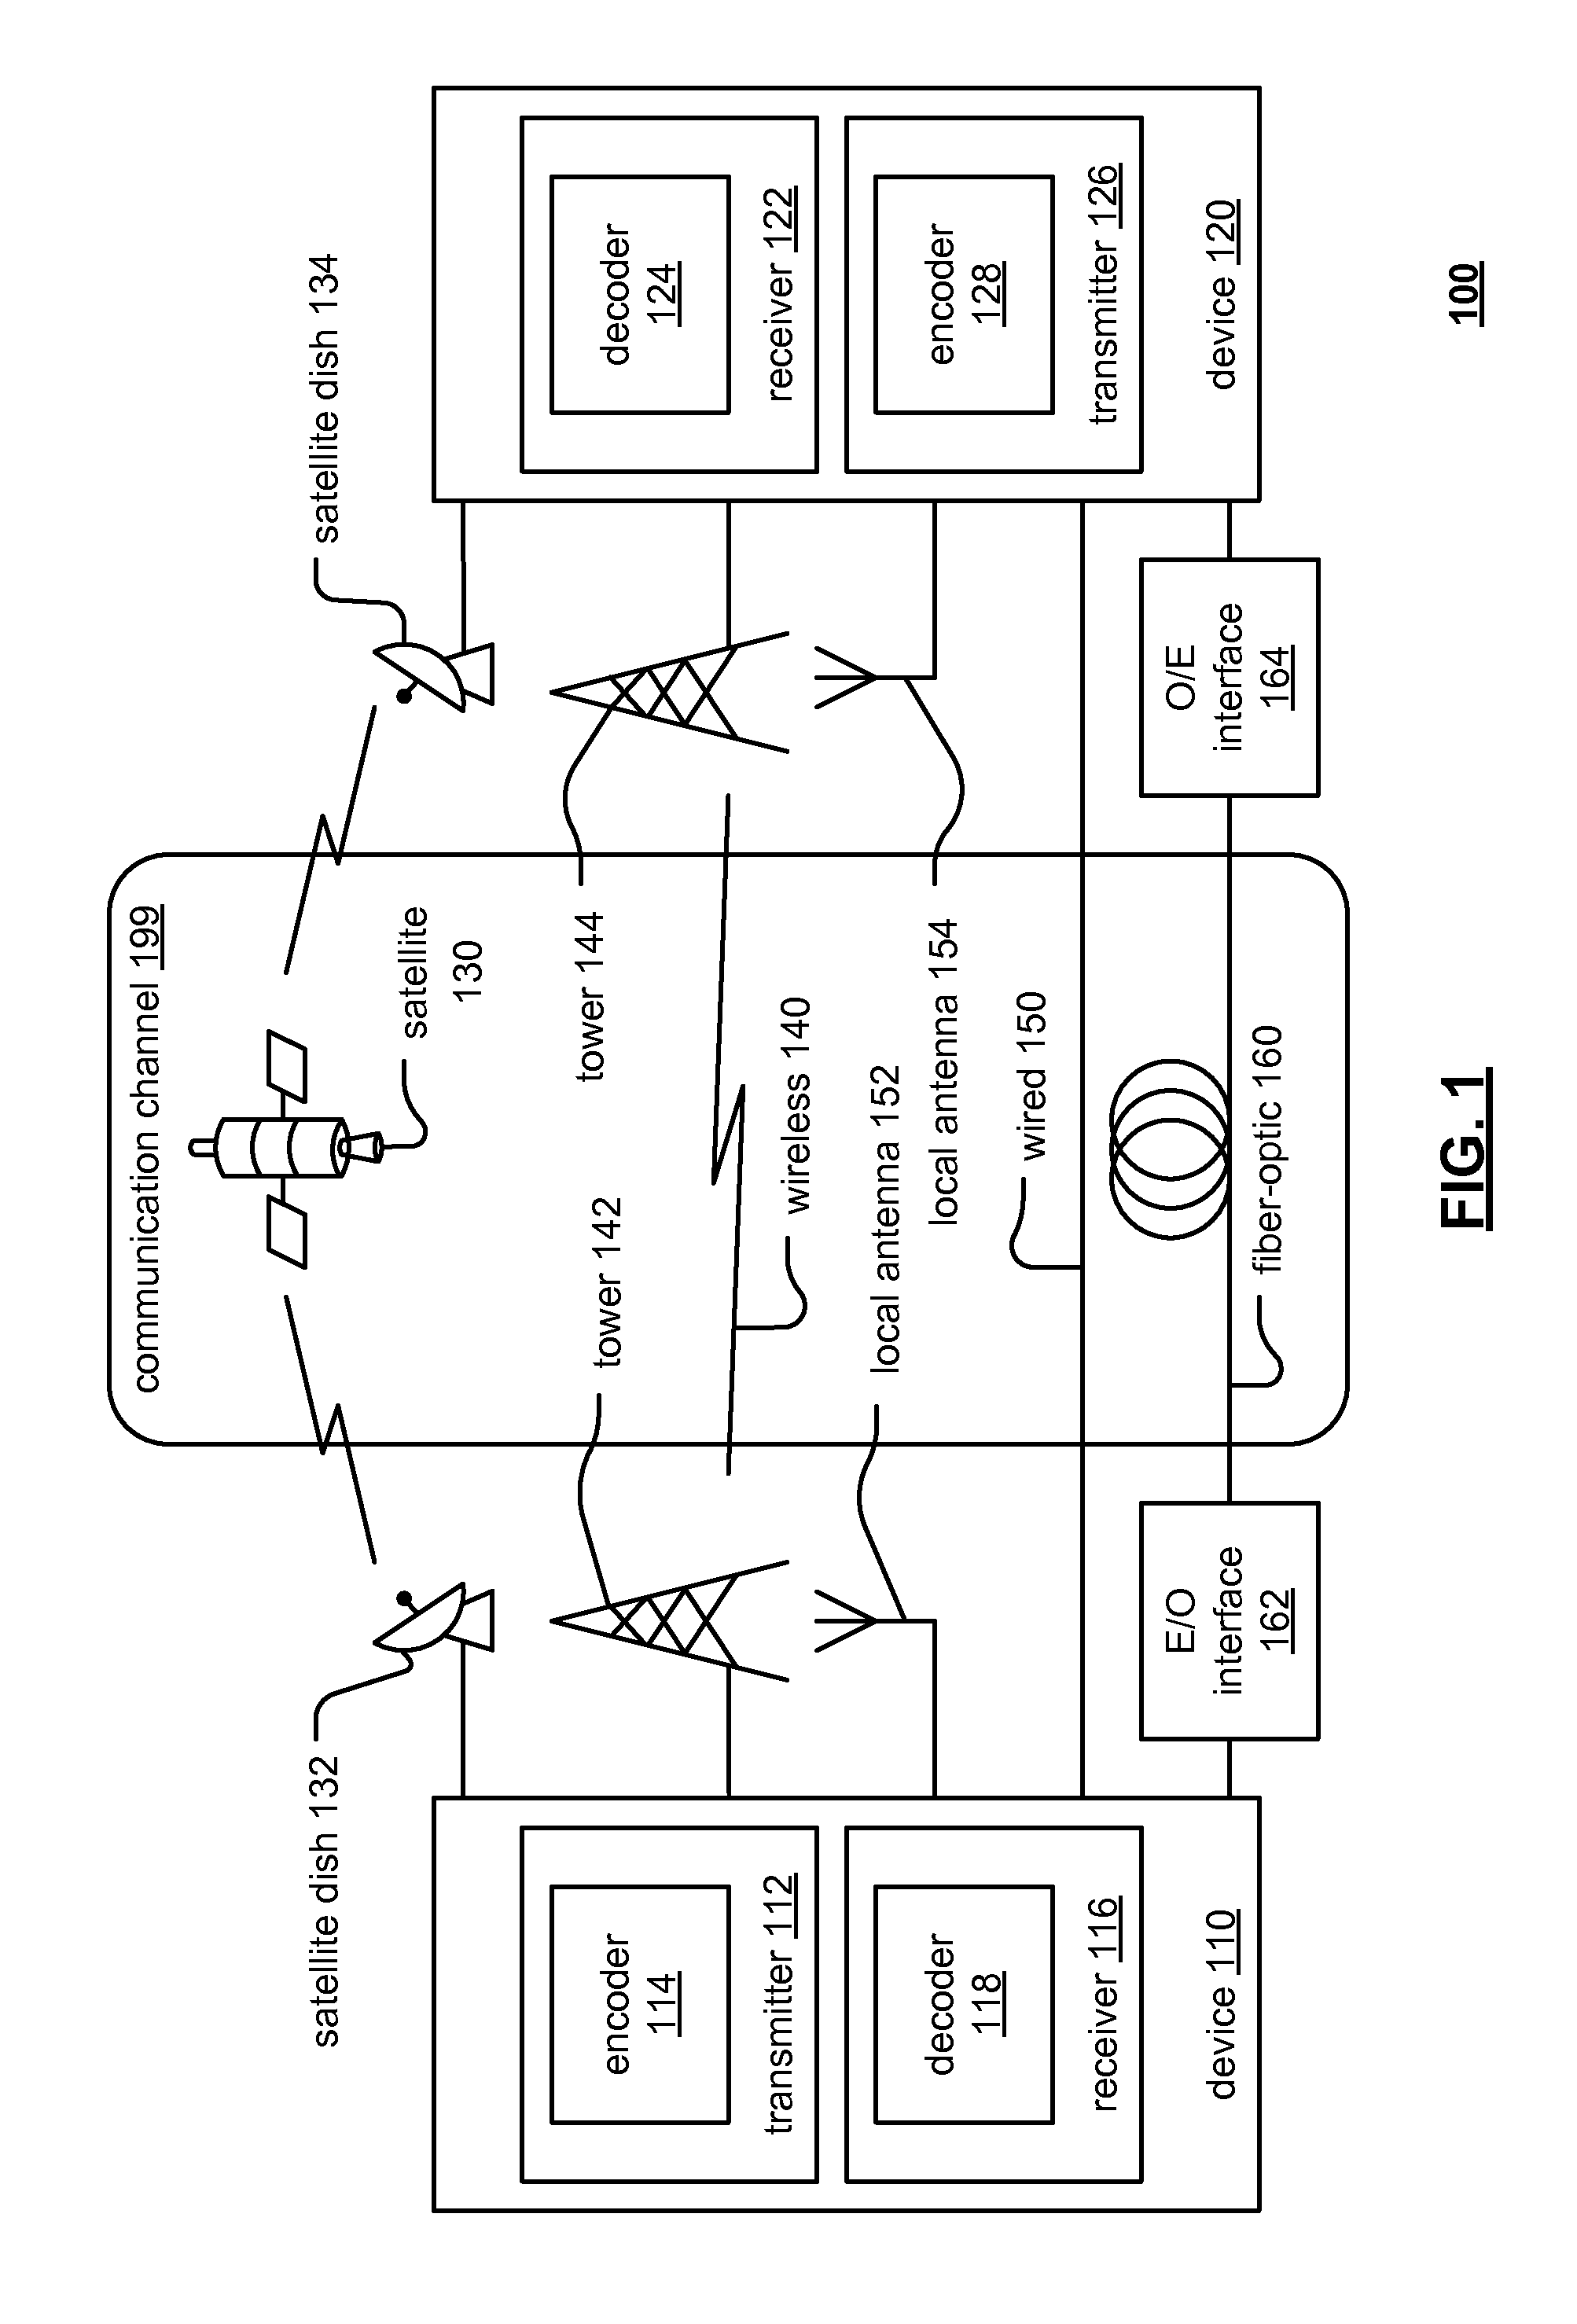 Digital to analog converter with thermometer coding and methods for use therewith